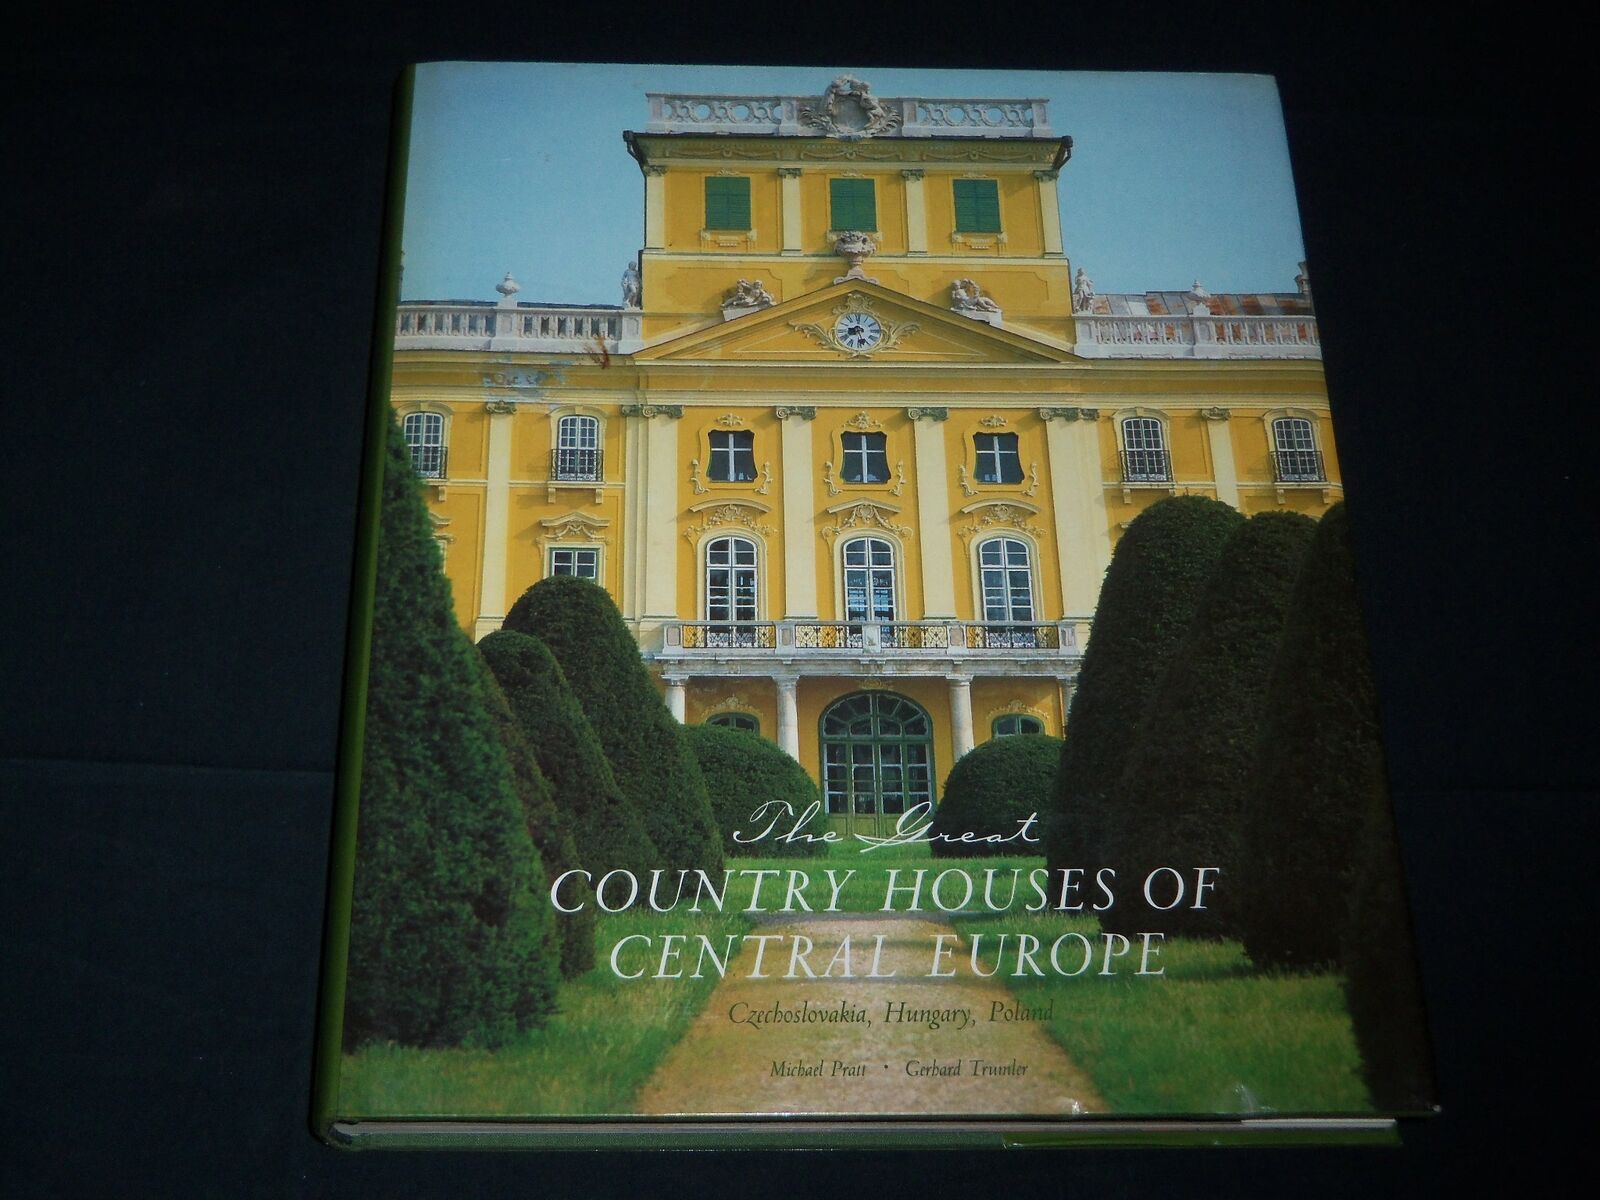 1991 THE GREAT COUNTRY HOUSES OF CENTRAL EUROPE BOOK BY MICHAEL PRATT - D 427